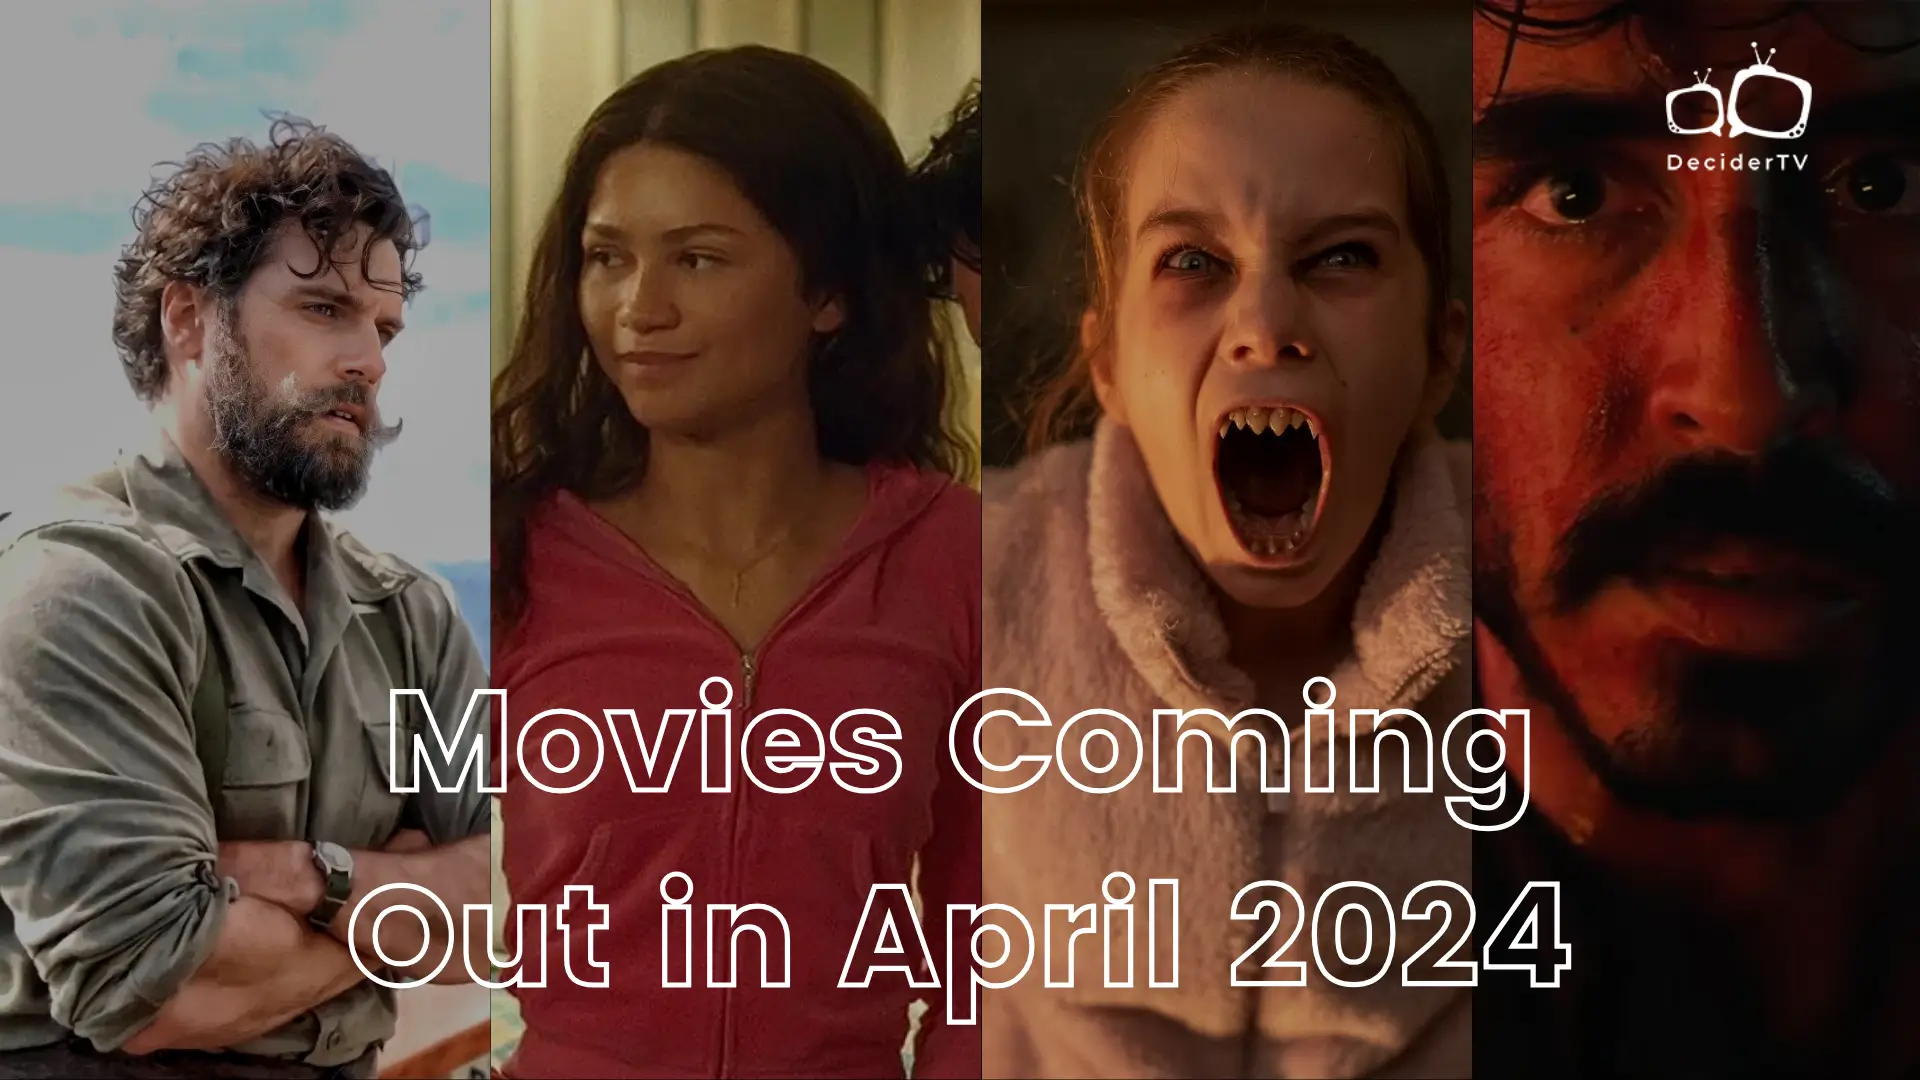 Movies Coming Out in April 2024